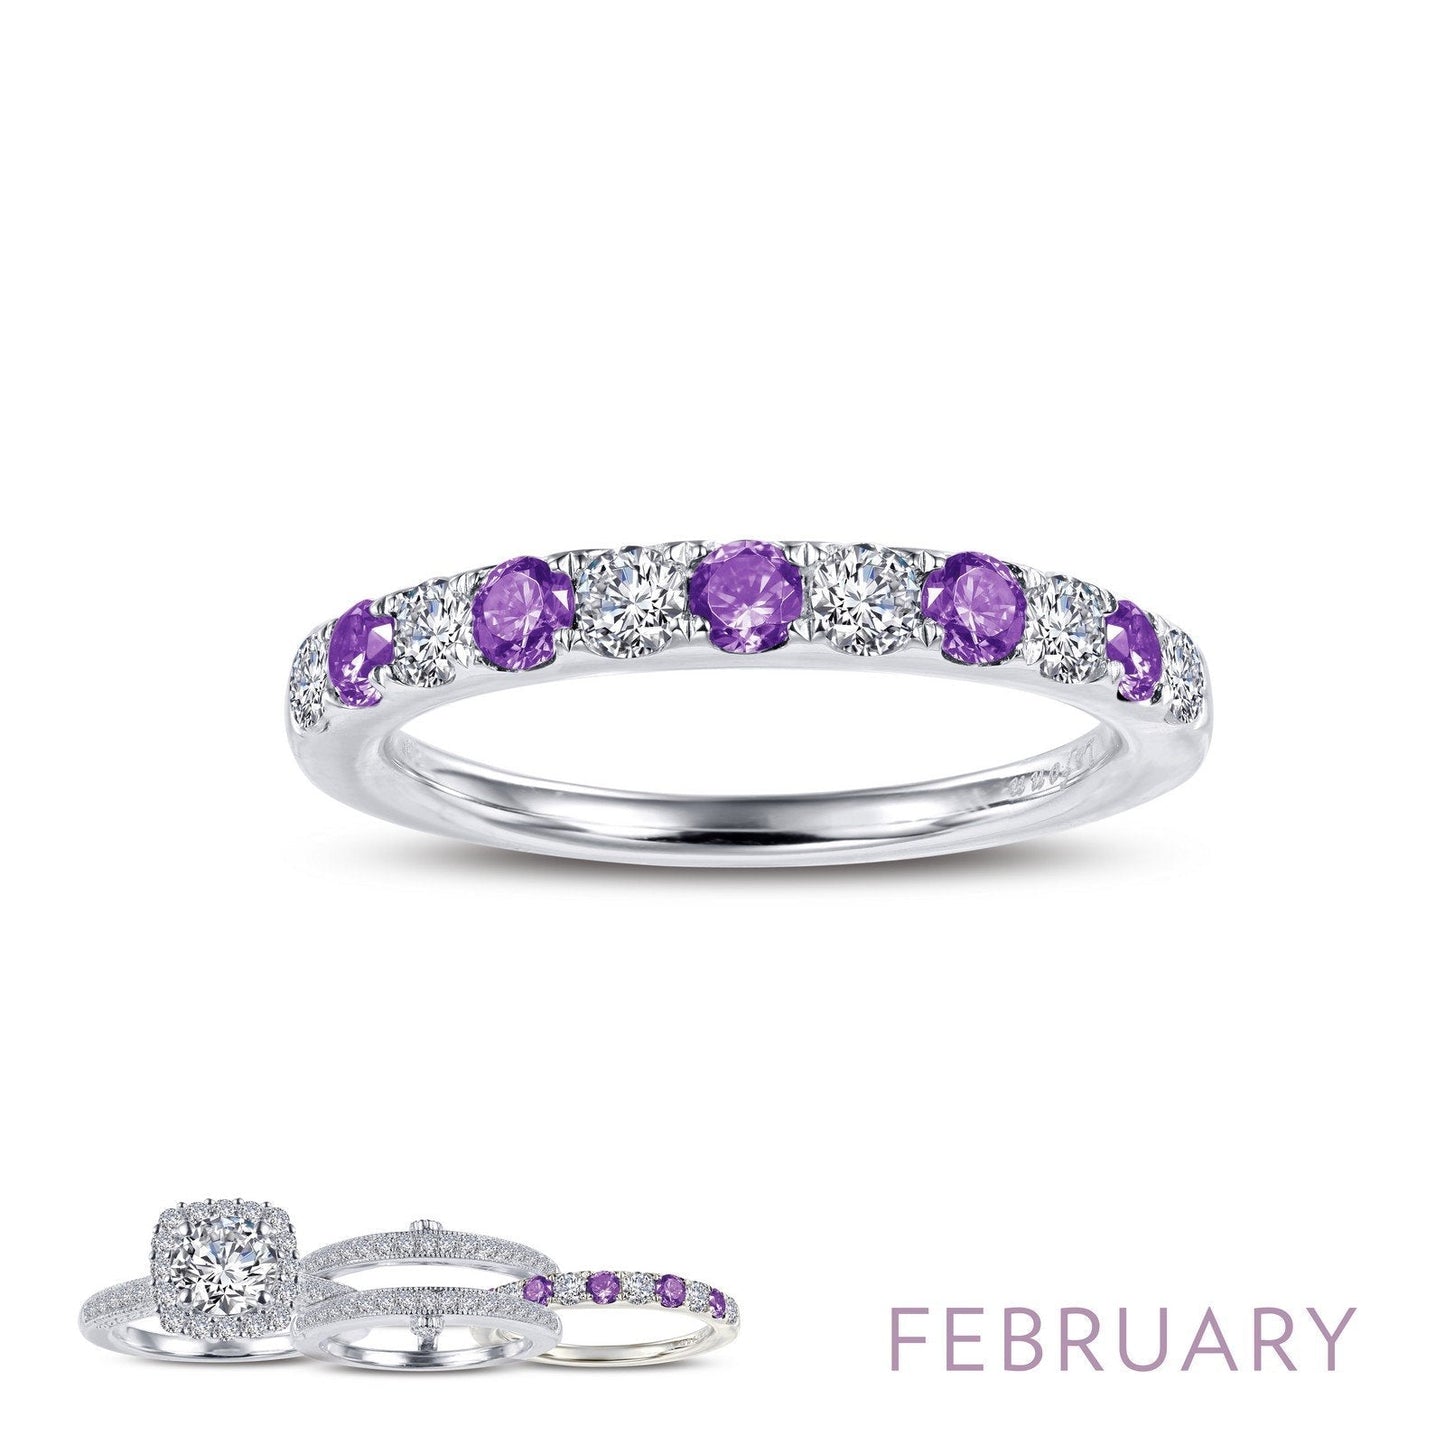 Lafonn February Birthstone Ring FEBRUARY RINGS Size 7 Platinum 0.51cts CTS Approx.2.7mm(W)